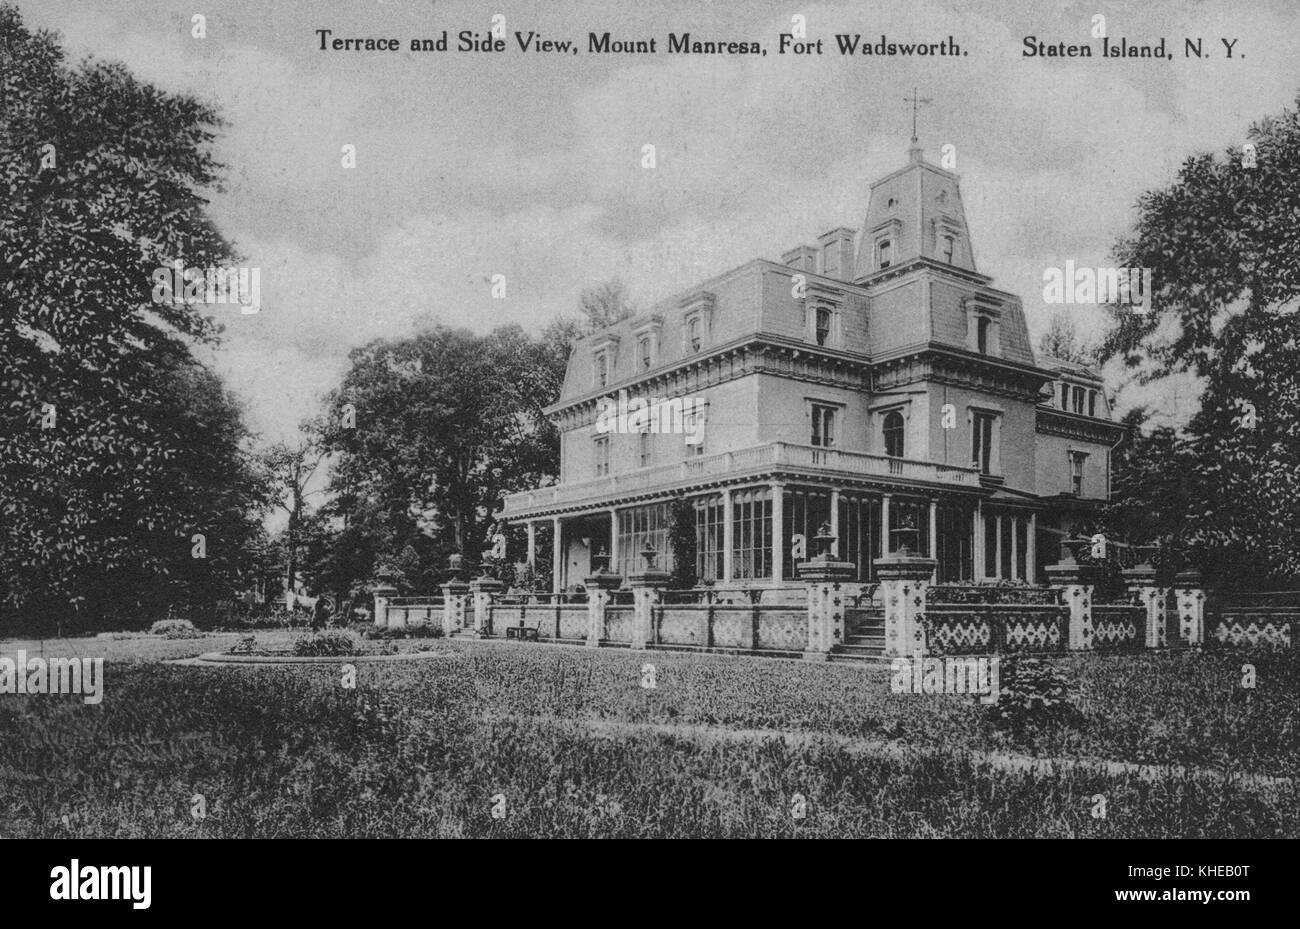 An old postcard picture of Mount Manresa, corner view showing the two sides of the whole building with its open terrace, low decorative fence, and a grassy lawn in the foreground, Fort Wadsworth, Staten Island, New York, 1900. From the New York Public Library. Stock Photo